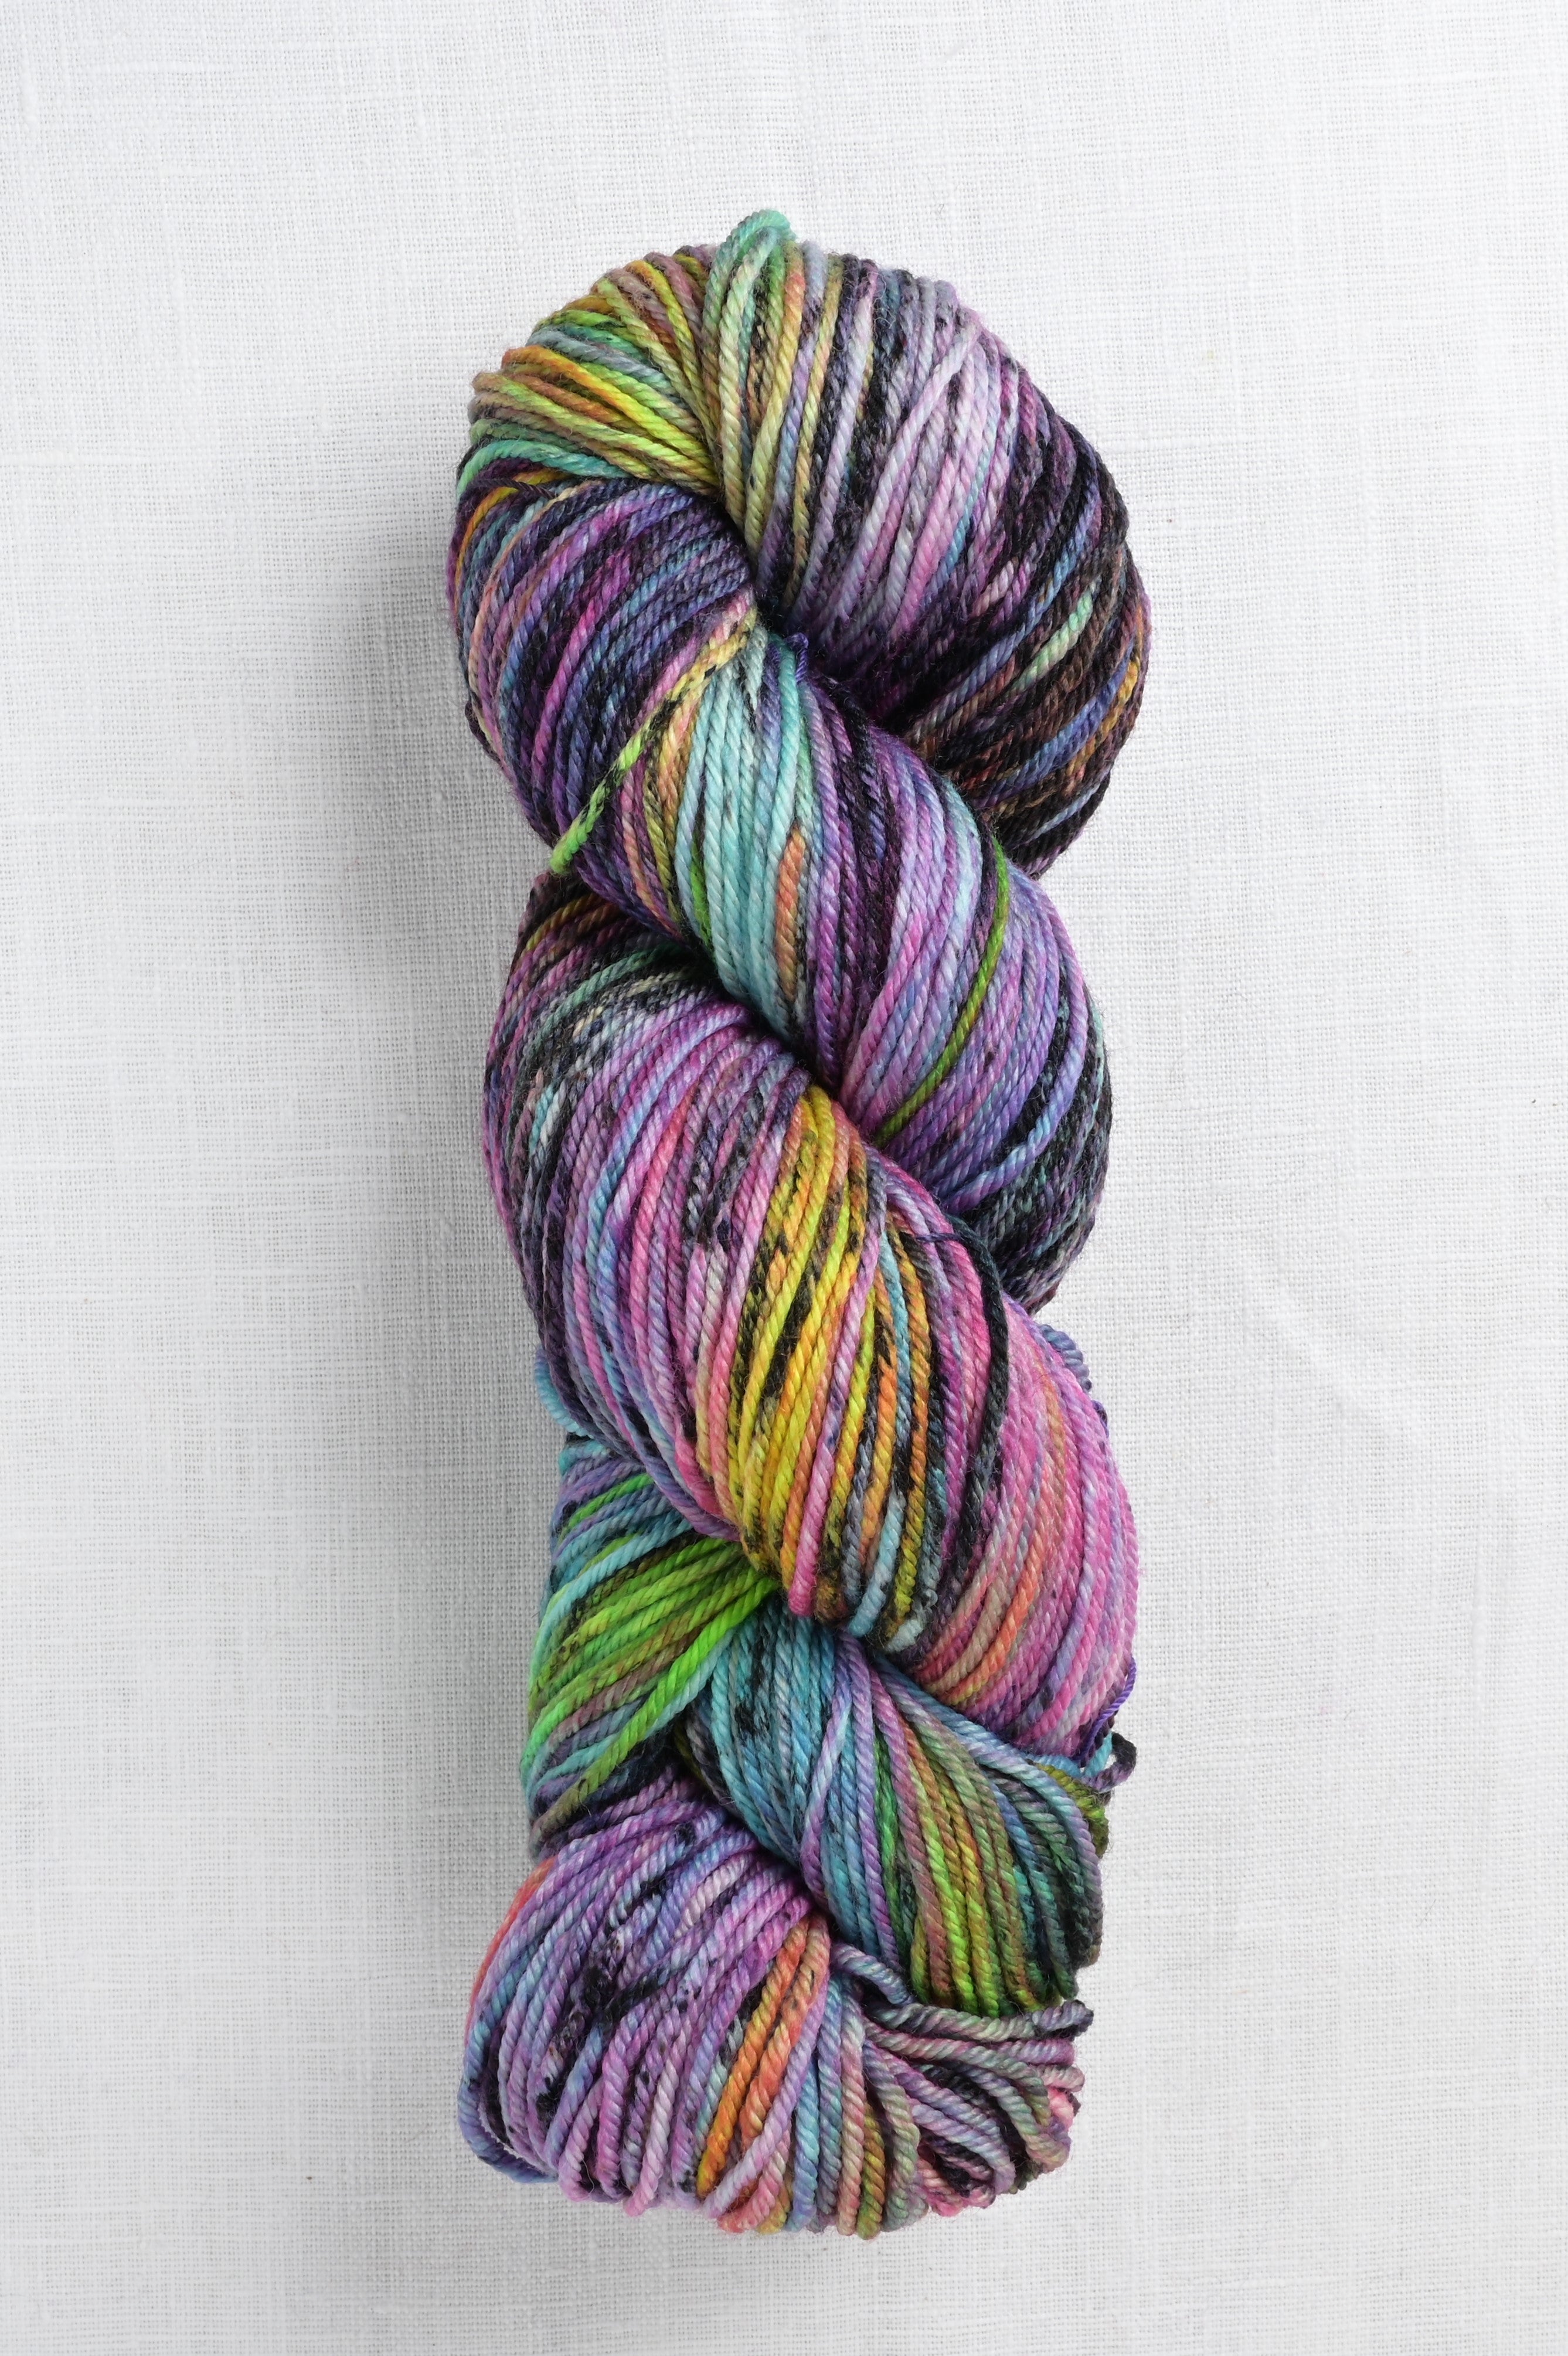 Madelinetosh Tosh DK Yarn - Electric Rainbow at Jimmy Beans Wool